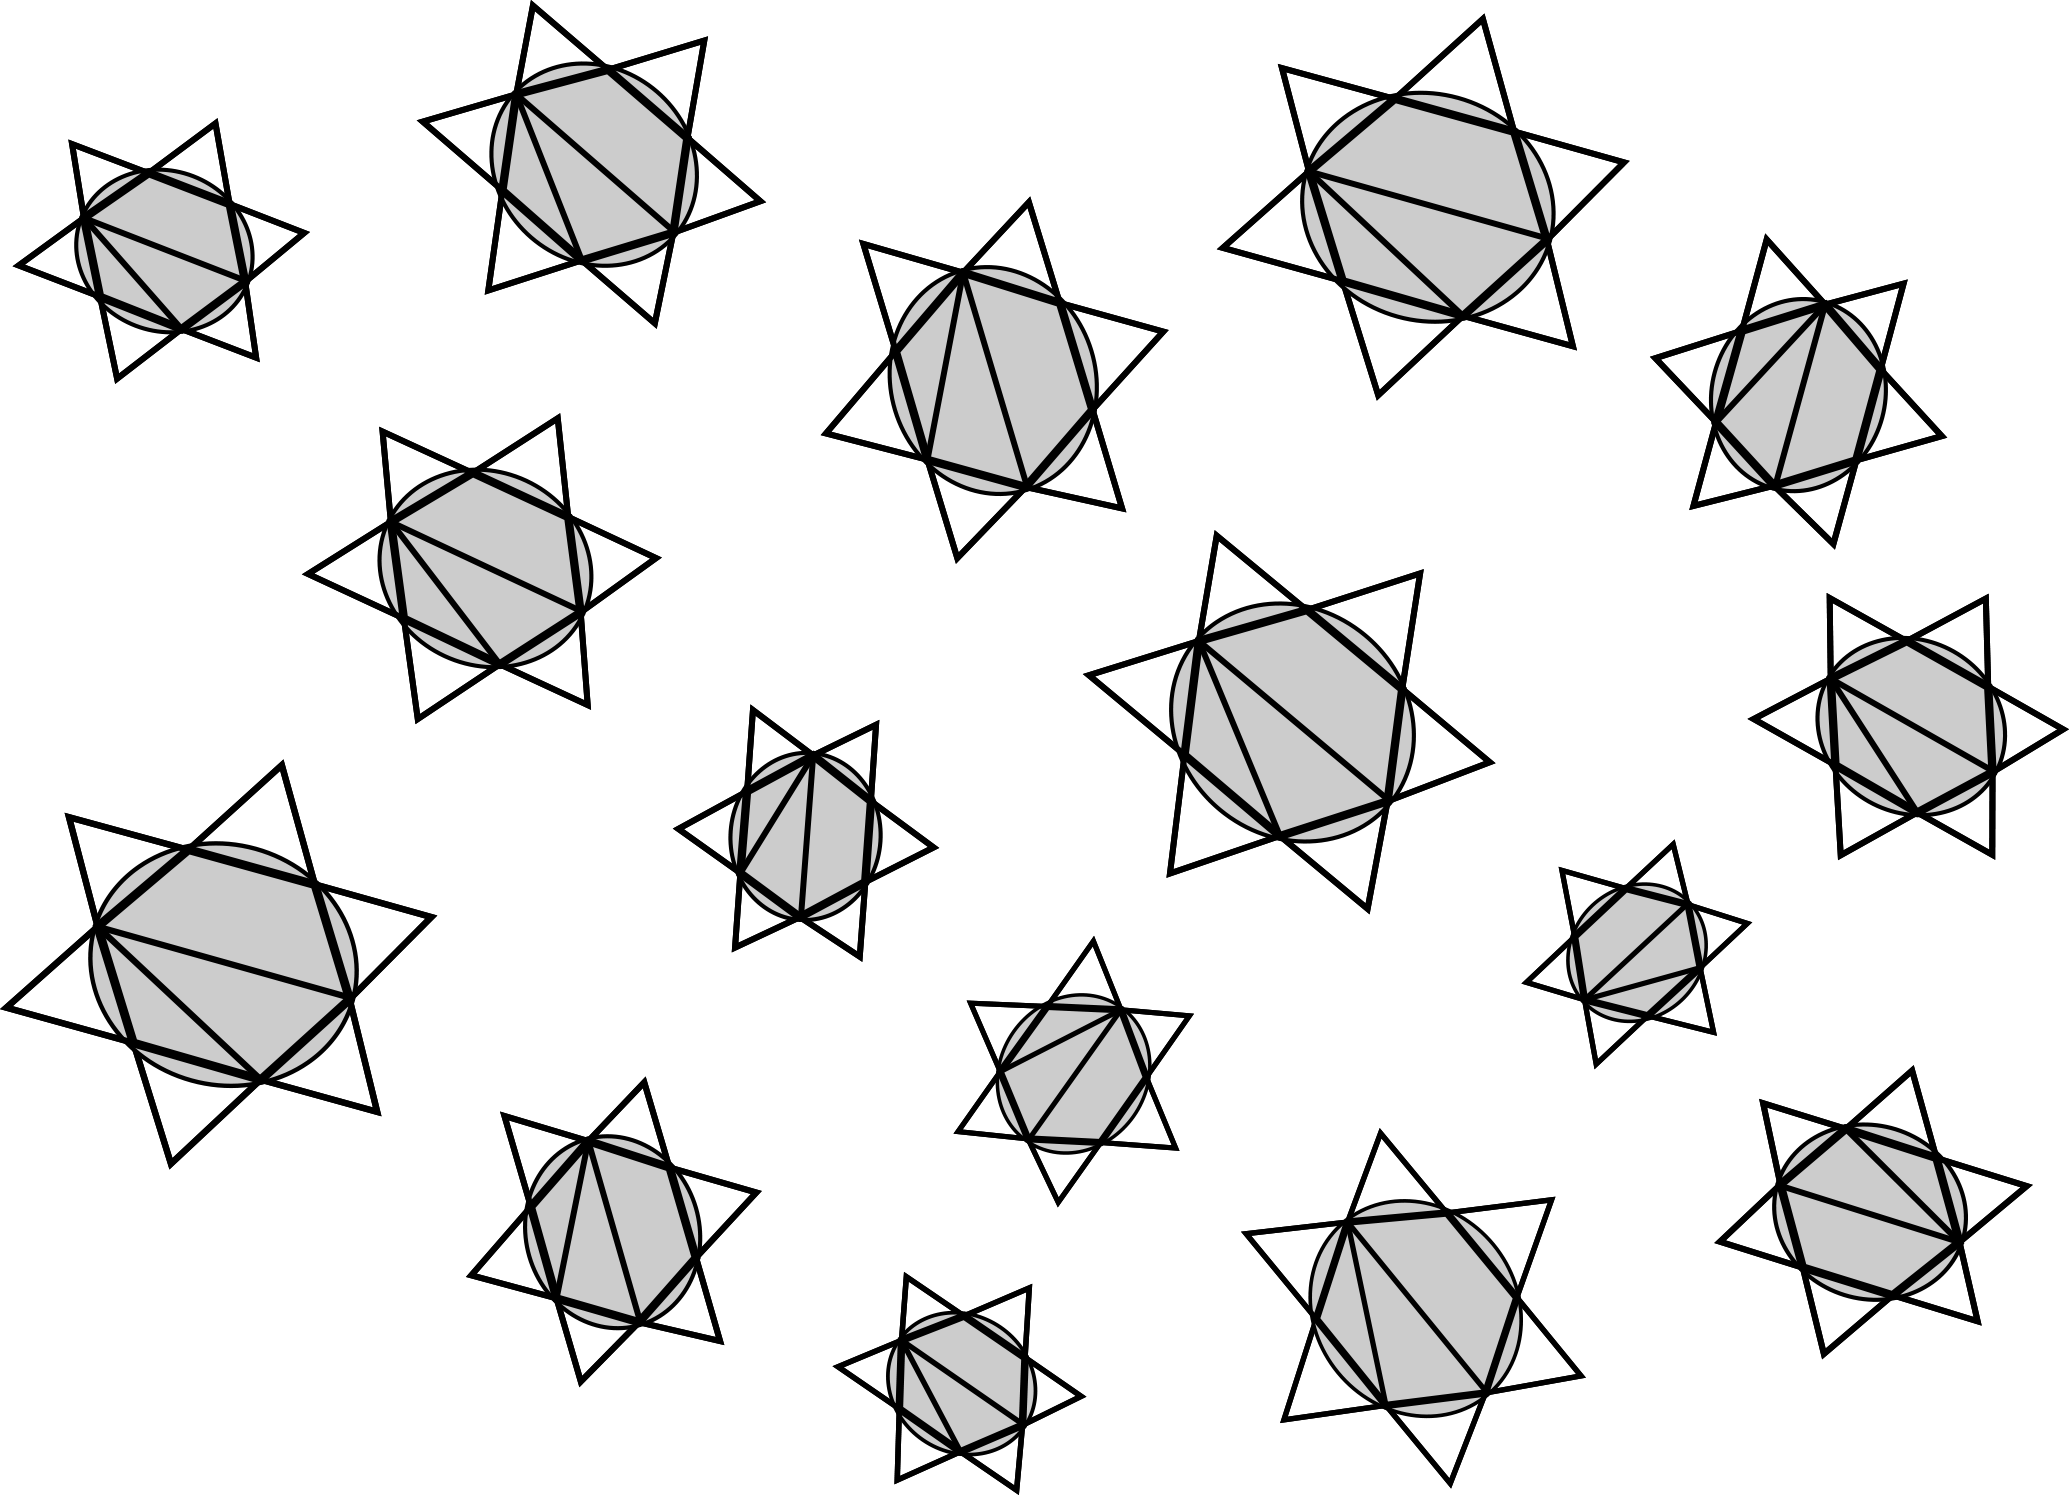 There are 16 figures. Each figure is formed as follows: A hexagon is drawn with a circle passing through all of its six vertices. From each vertex of the hexagon, two straight lines are drawn outside the circle. From one vertex of the hexagon, two straight lines are drawn inside the circle joining it to two other vertices that are side by side.